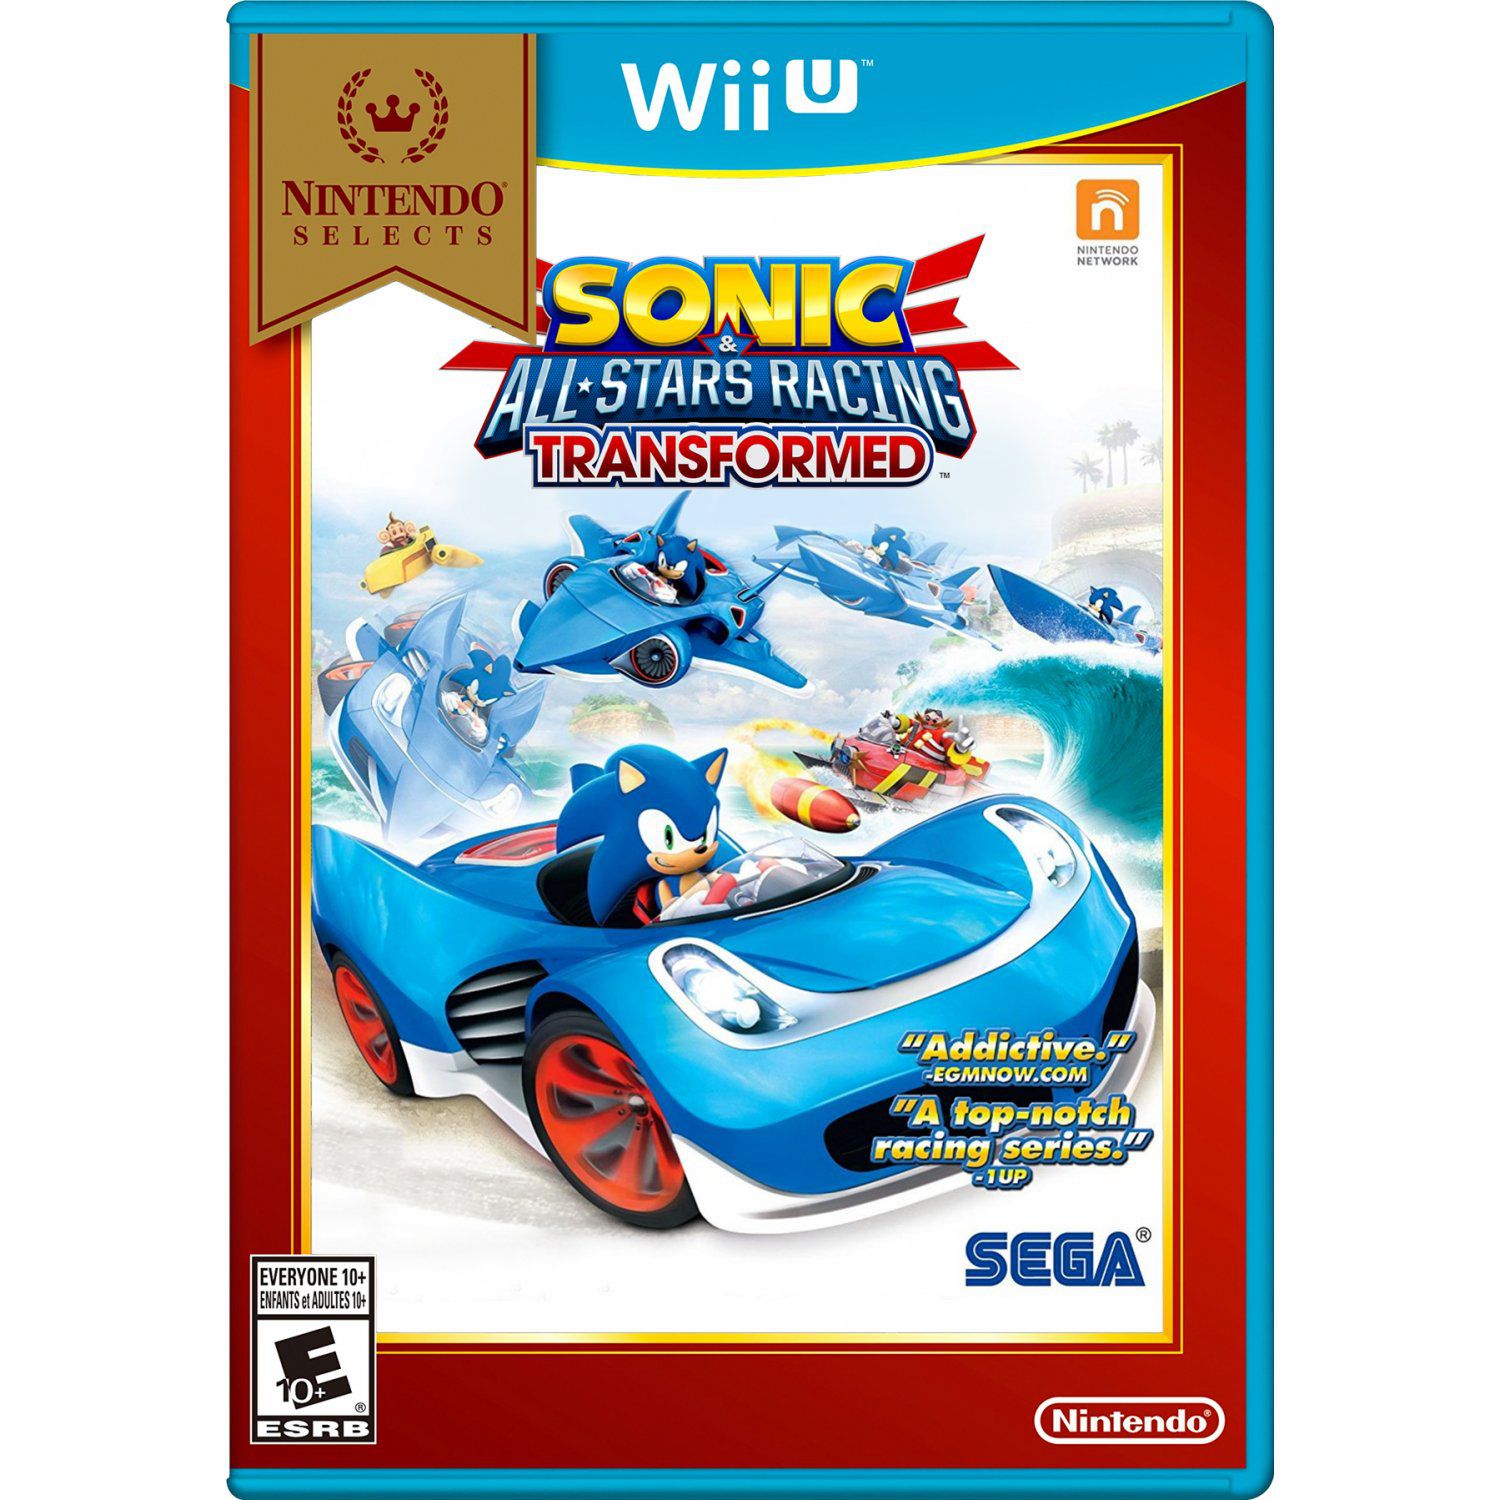 Sonic e All-Stars Racing Transformed - Xbox 360 / Xbox One - Game Games -  Loja de Games Online